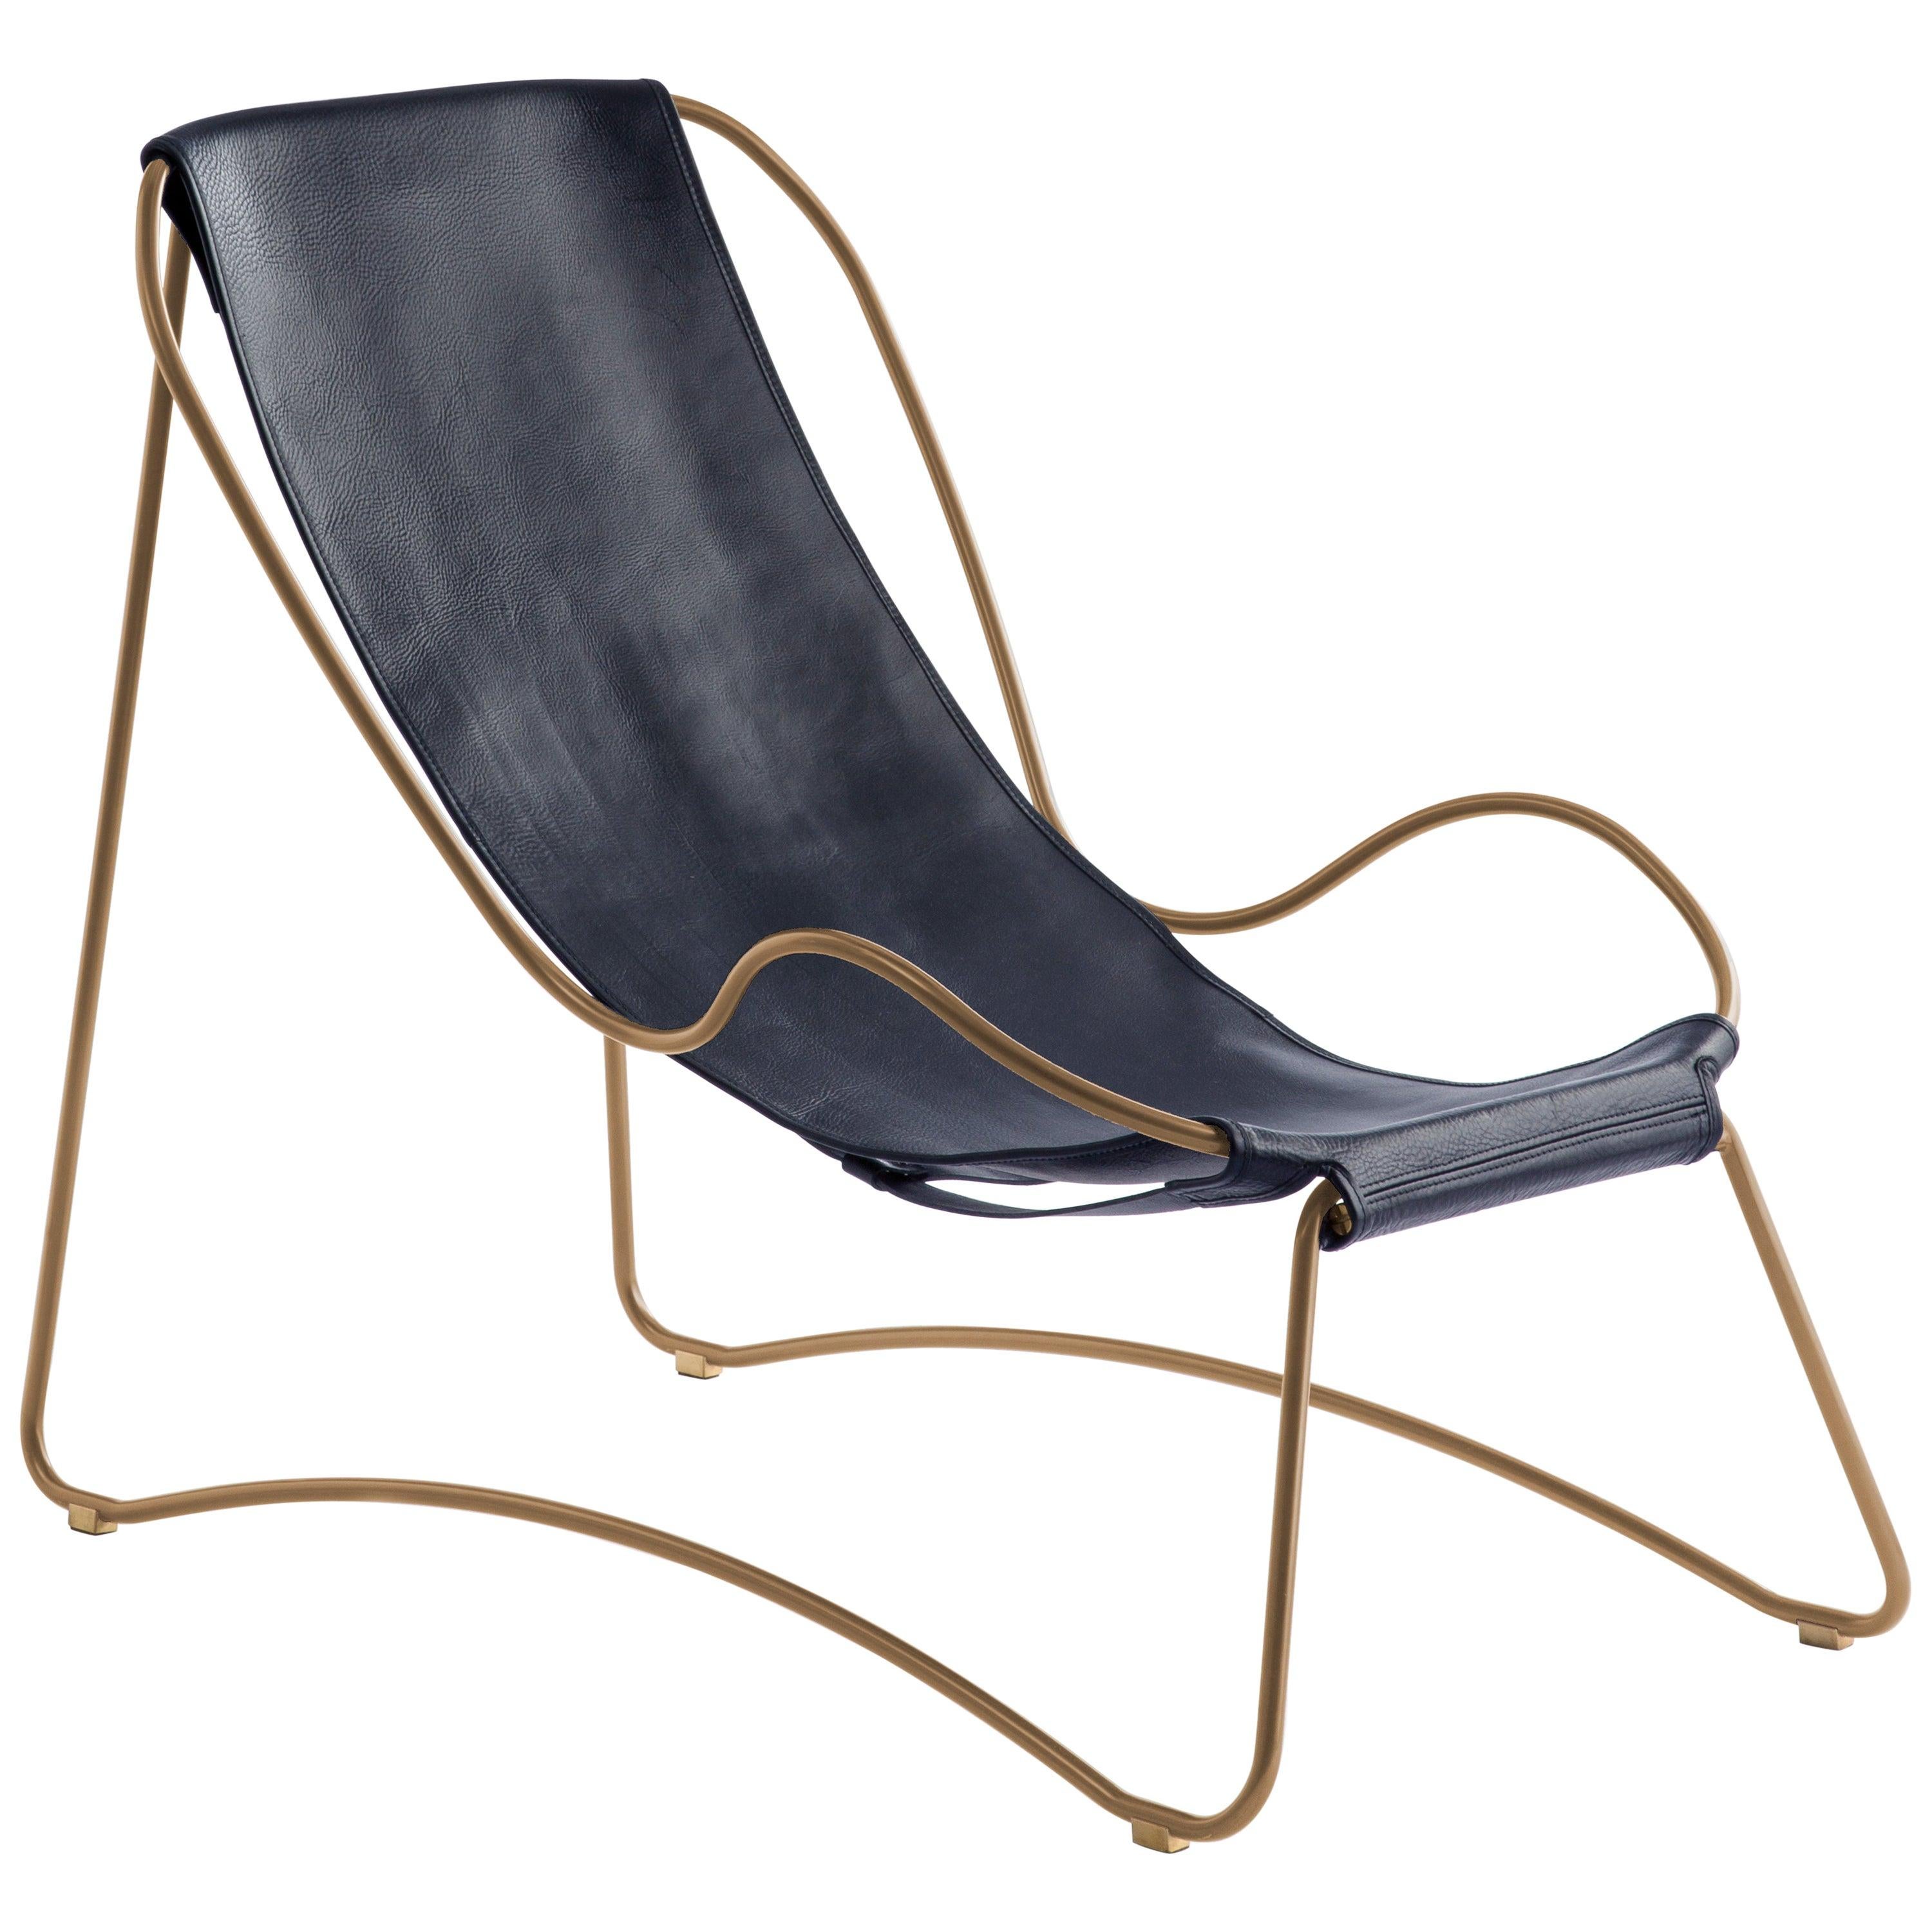 Skulpturale Contemporary Chaise Lounge Metall in Altmessing, Leder in Marineblau Muster